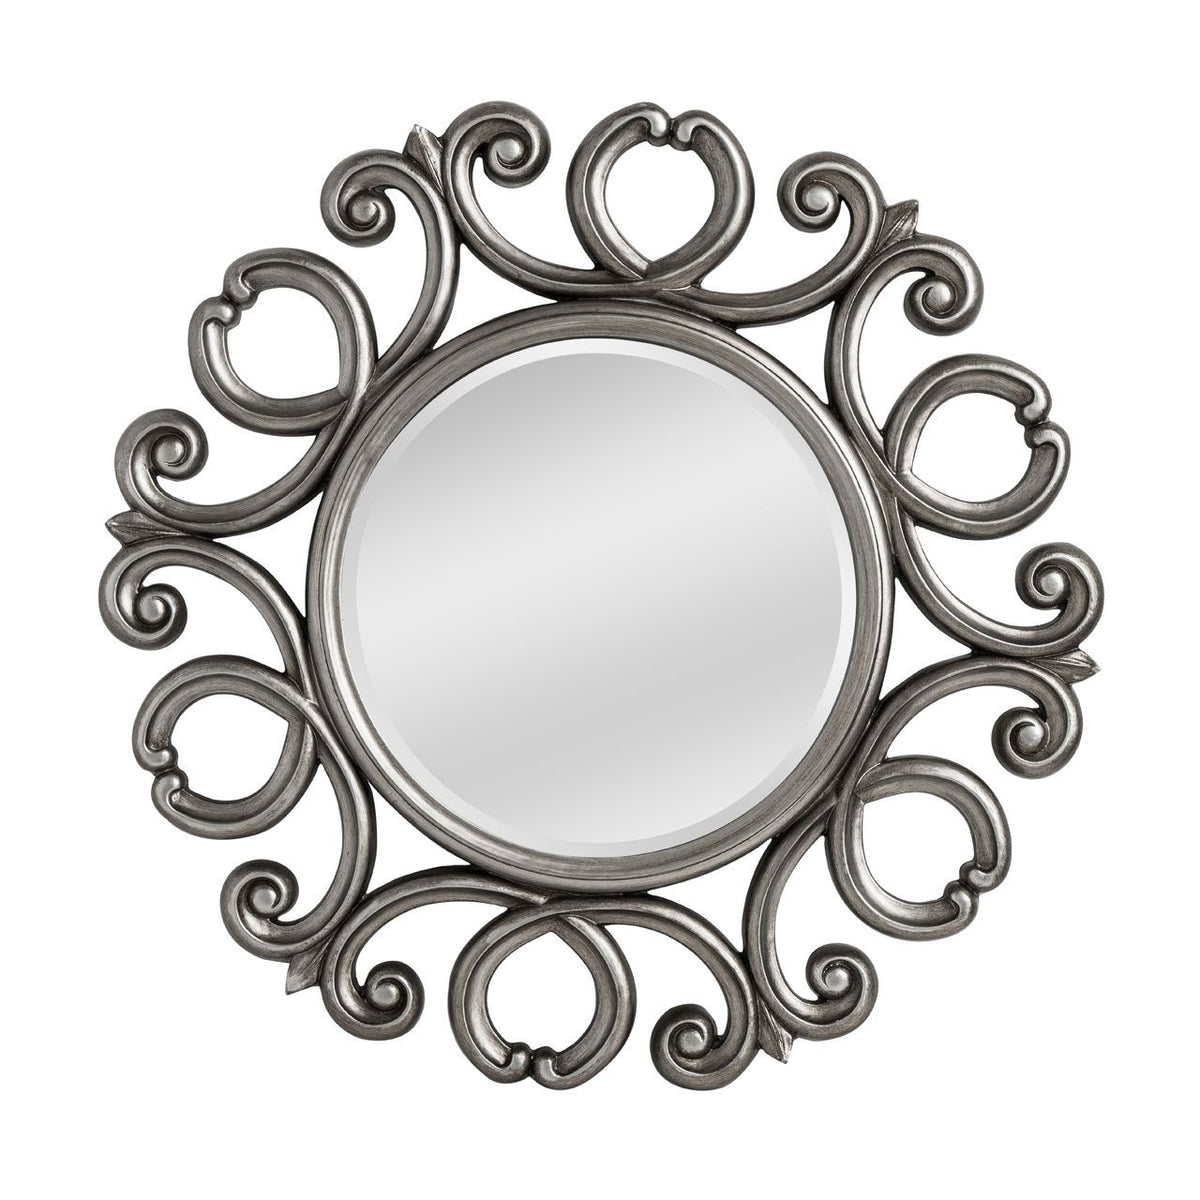 SILVER FINISH FRAME ROUND WALL MIRROR